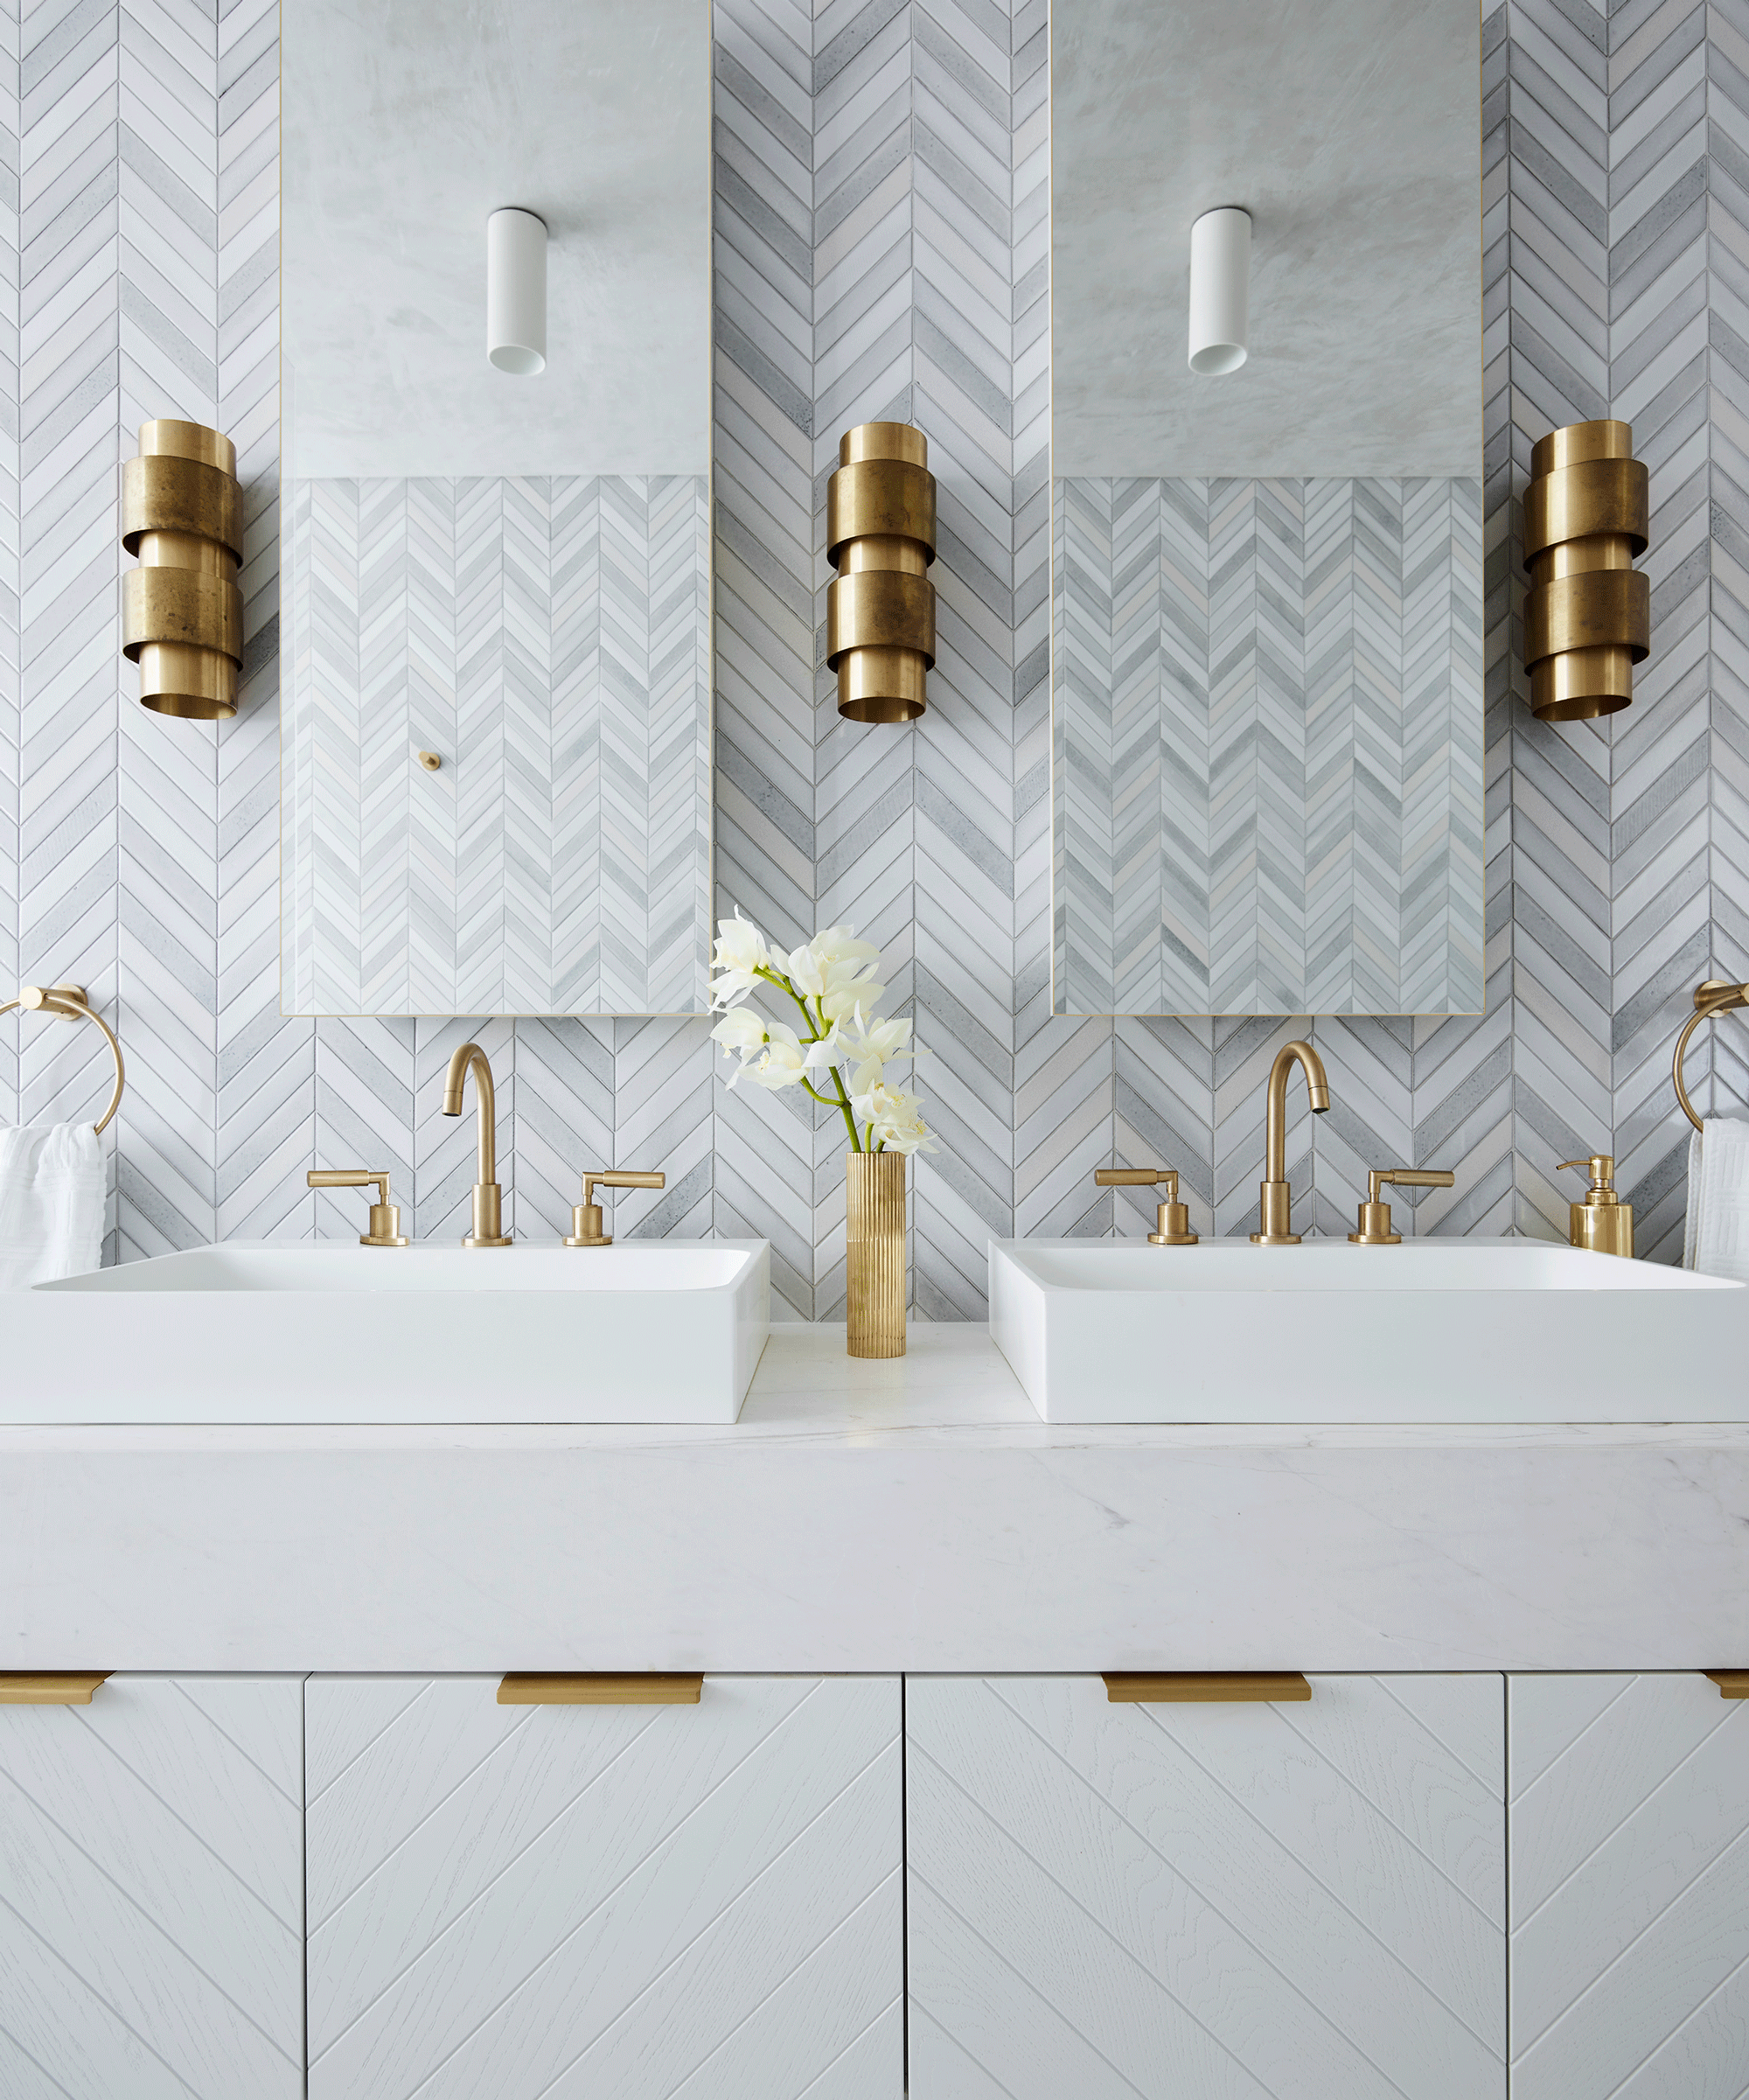 An example of bathroom wall ideas showing a white bathroom with brass accents